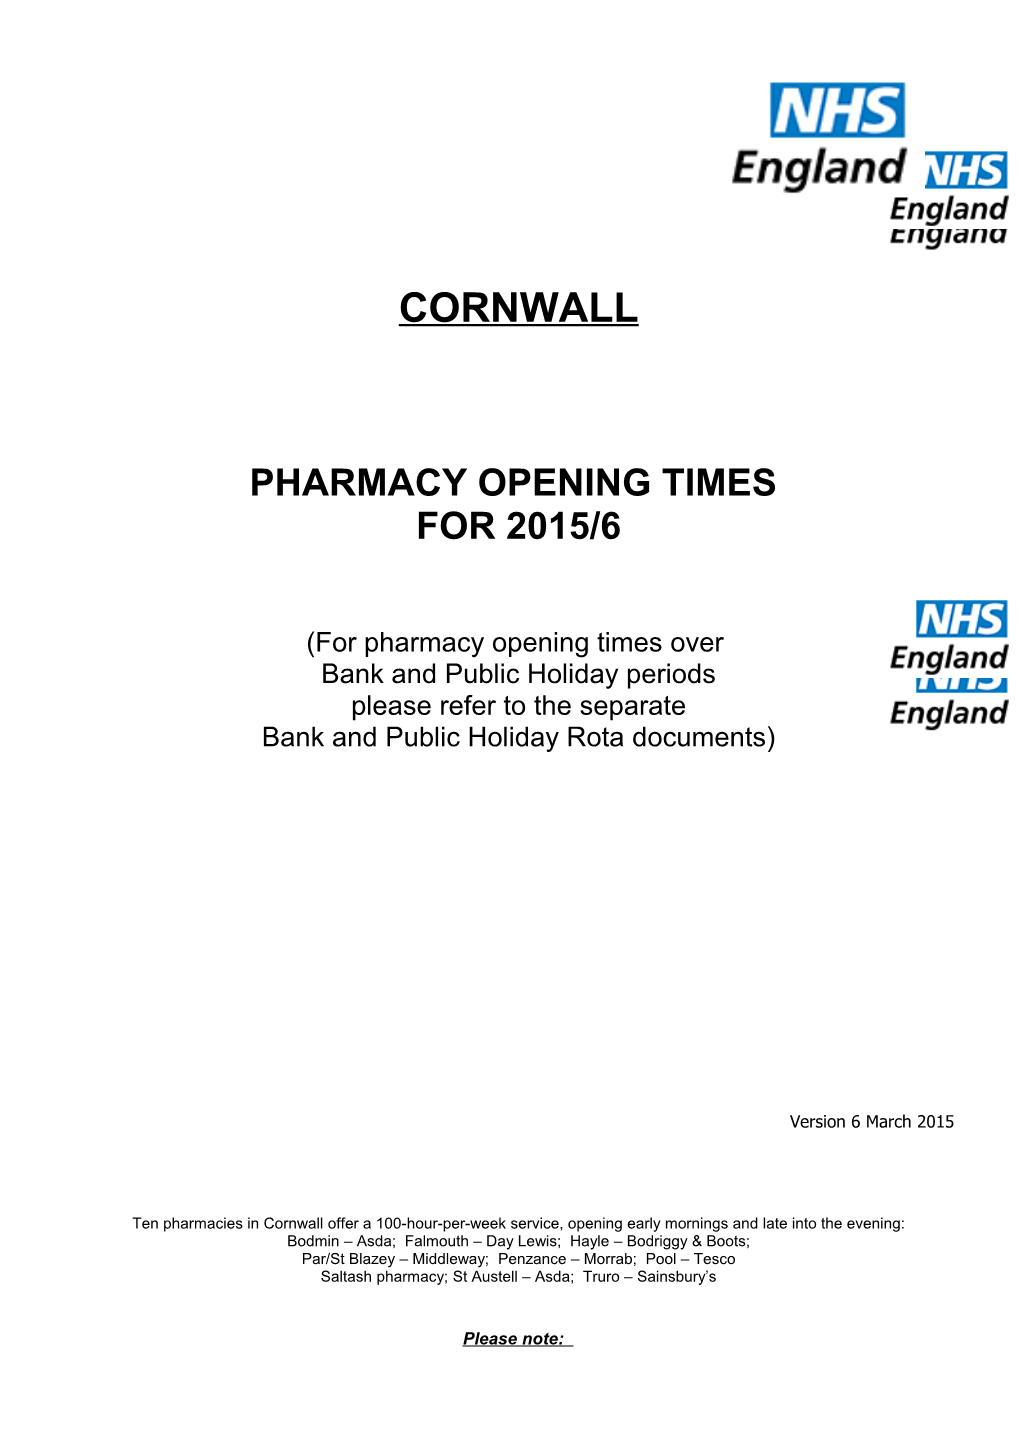 Pharmacy Opening Times When Prescriptions Can Be Dispensed & out of Hours Rota